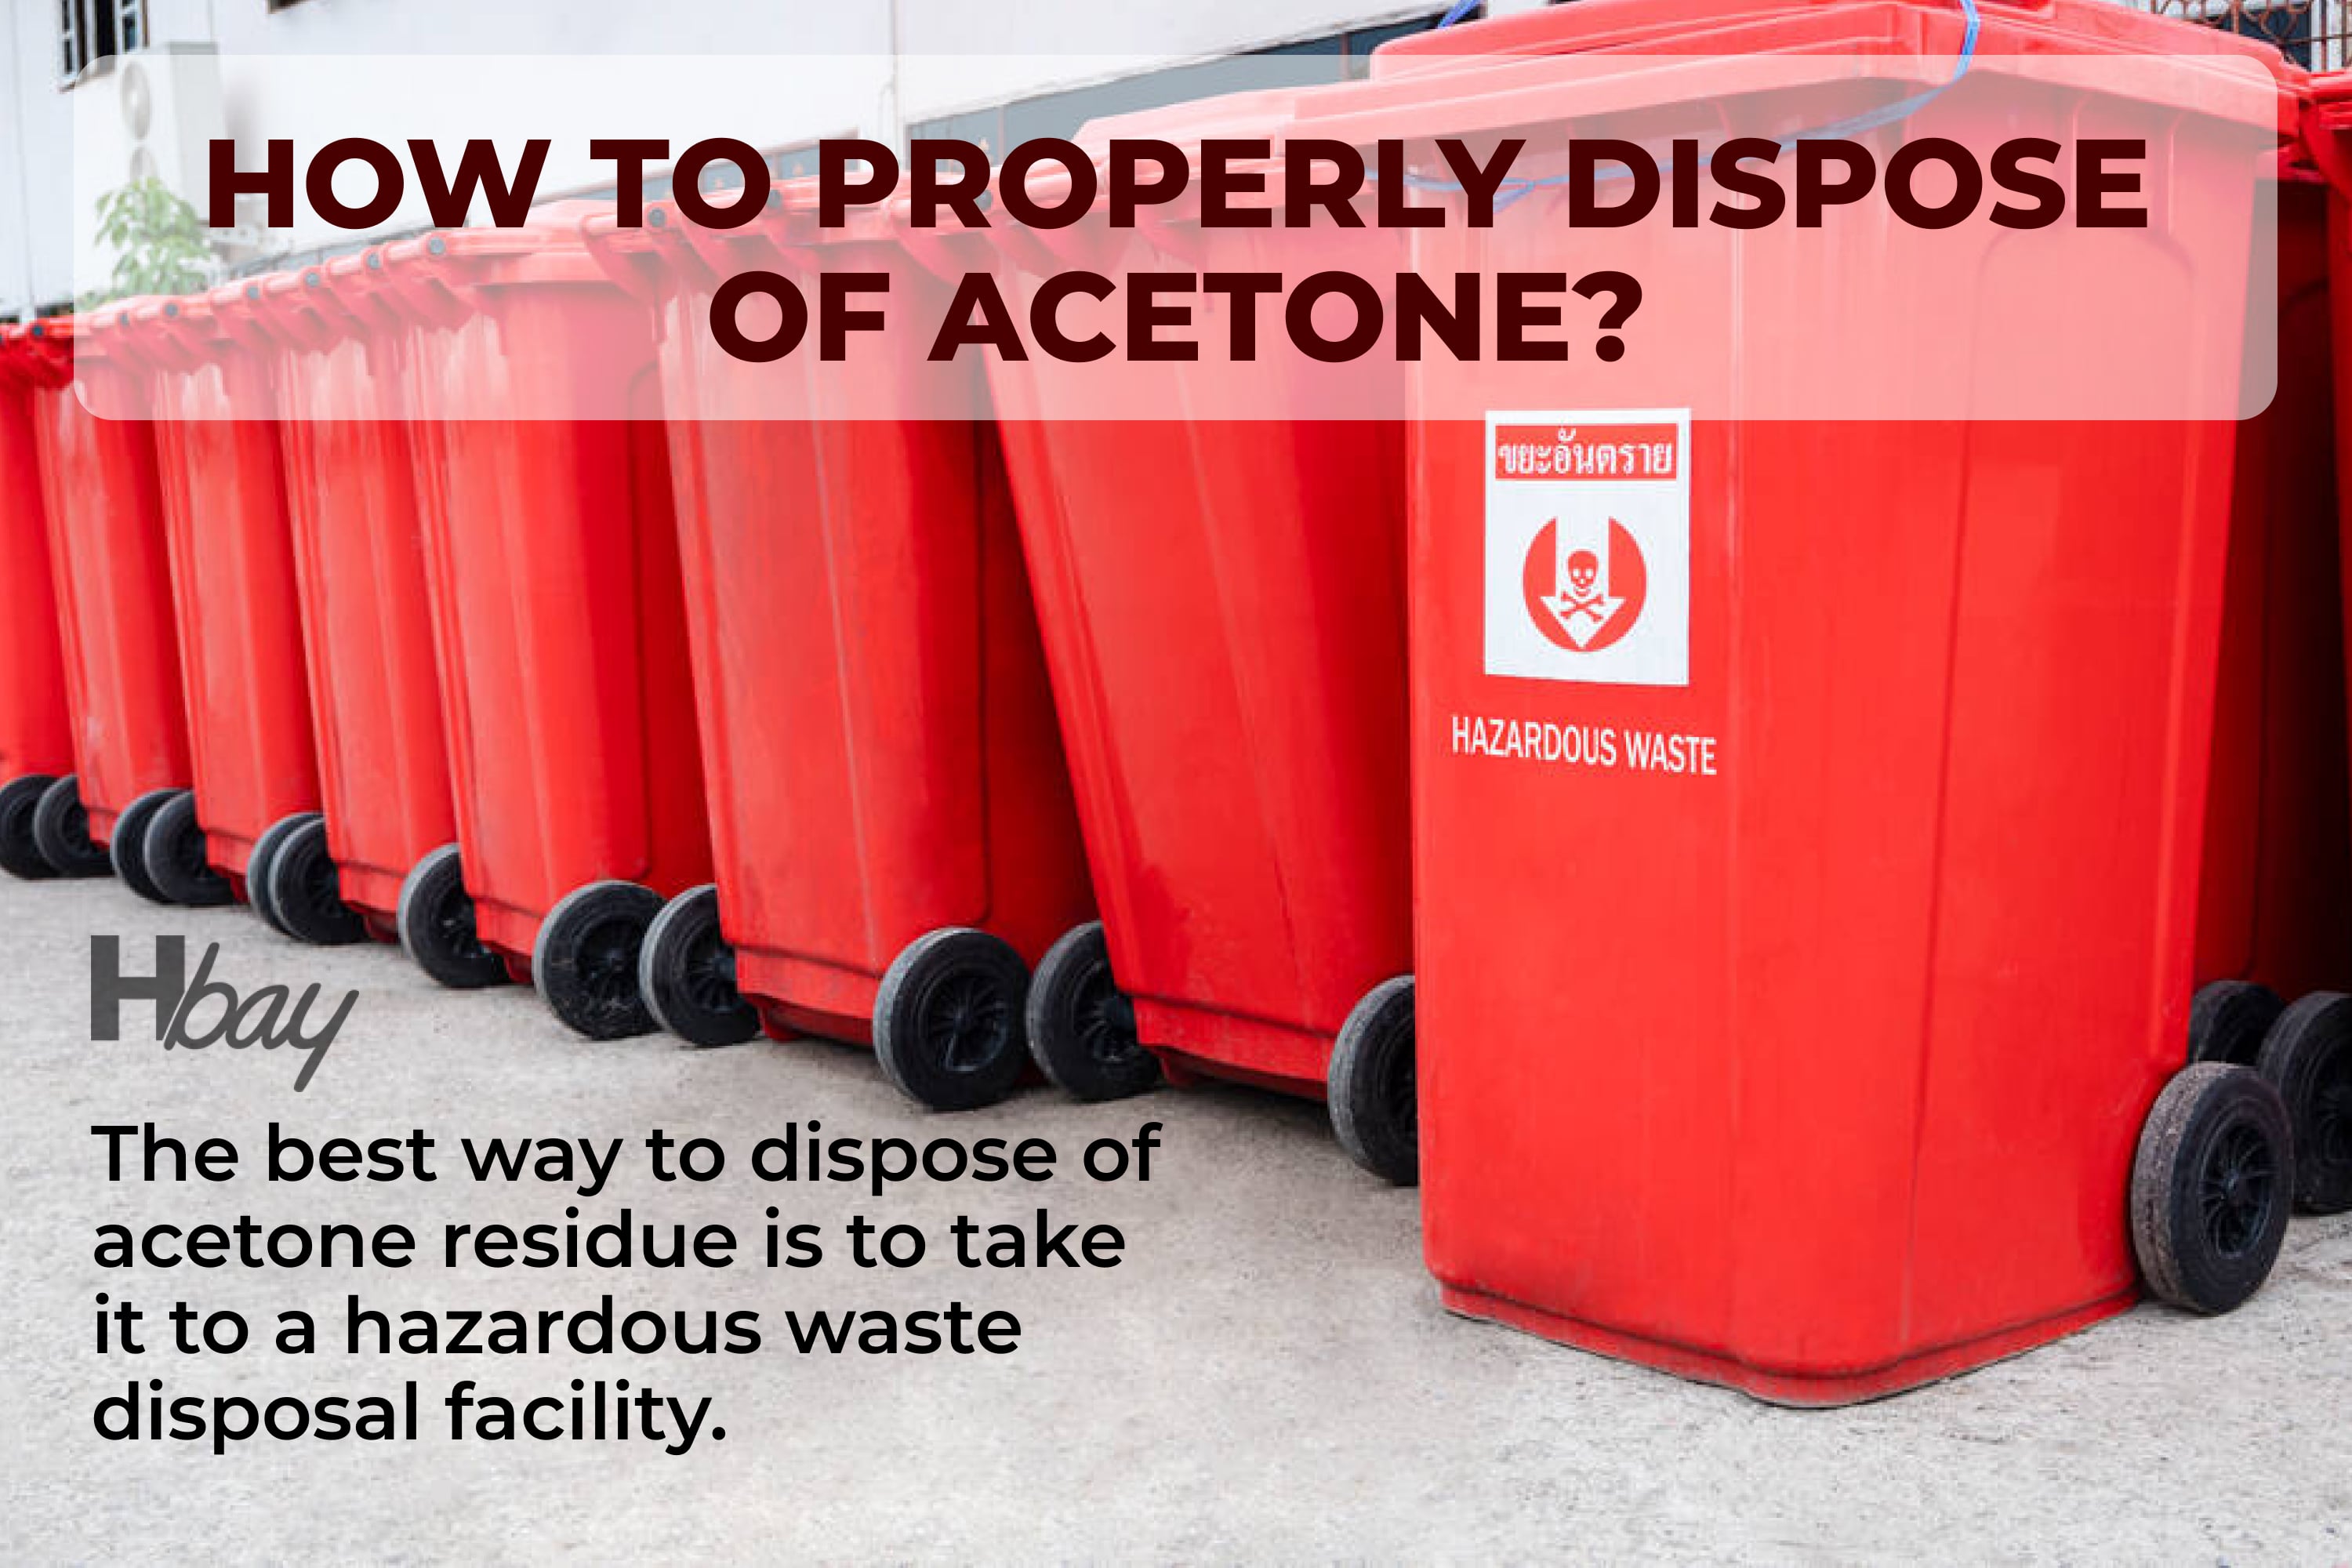 How to properly dispose of acetone